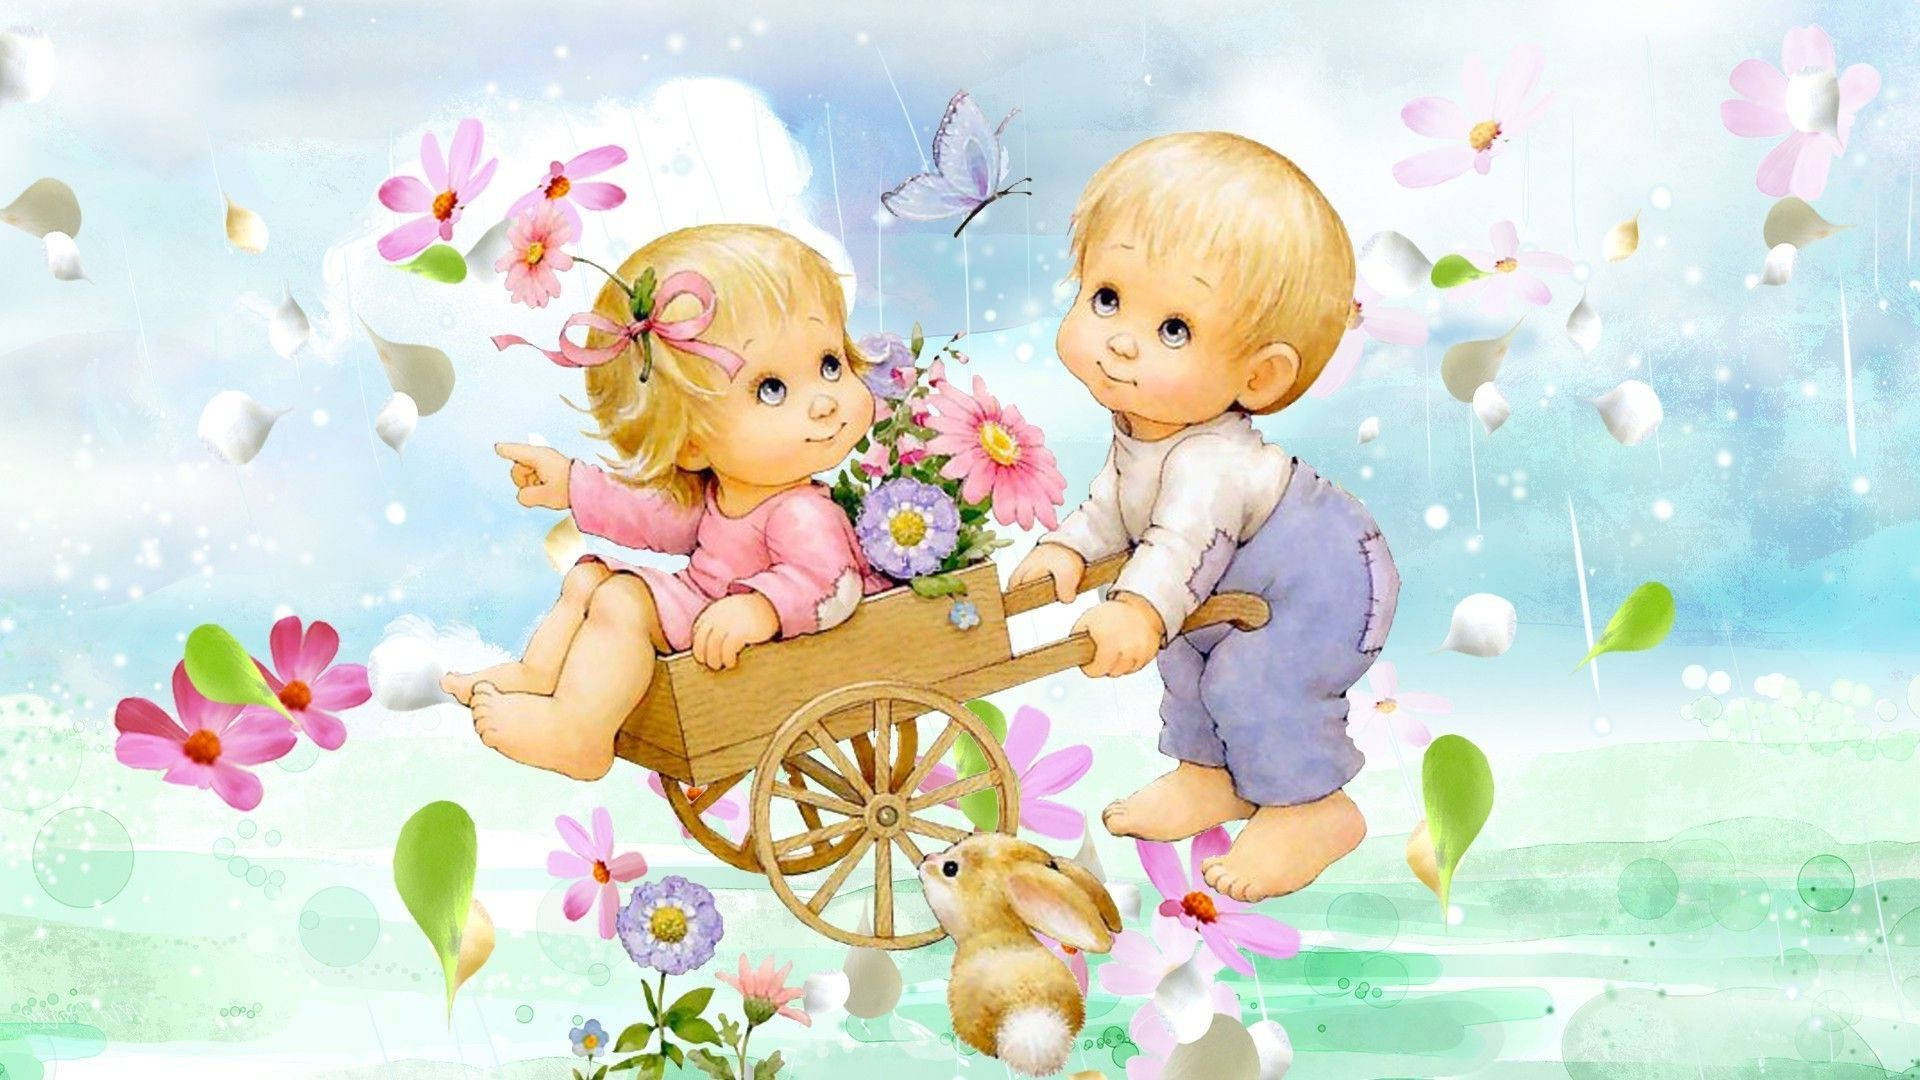 Cartoon babies playing with flowers and butterflies wallpaper.